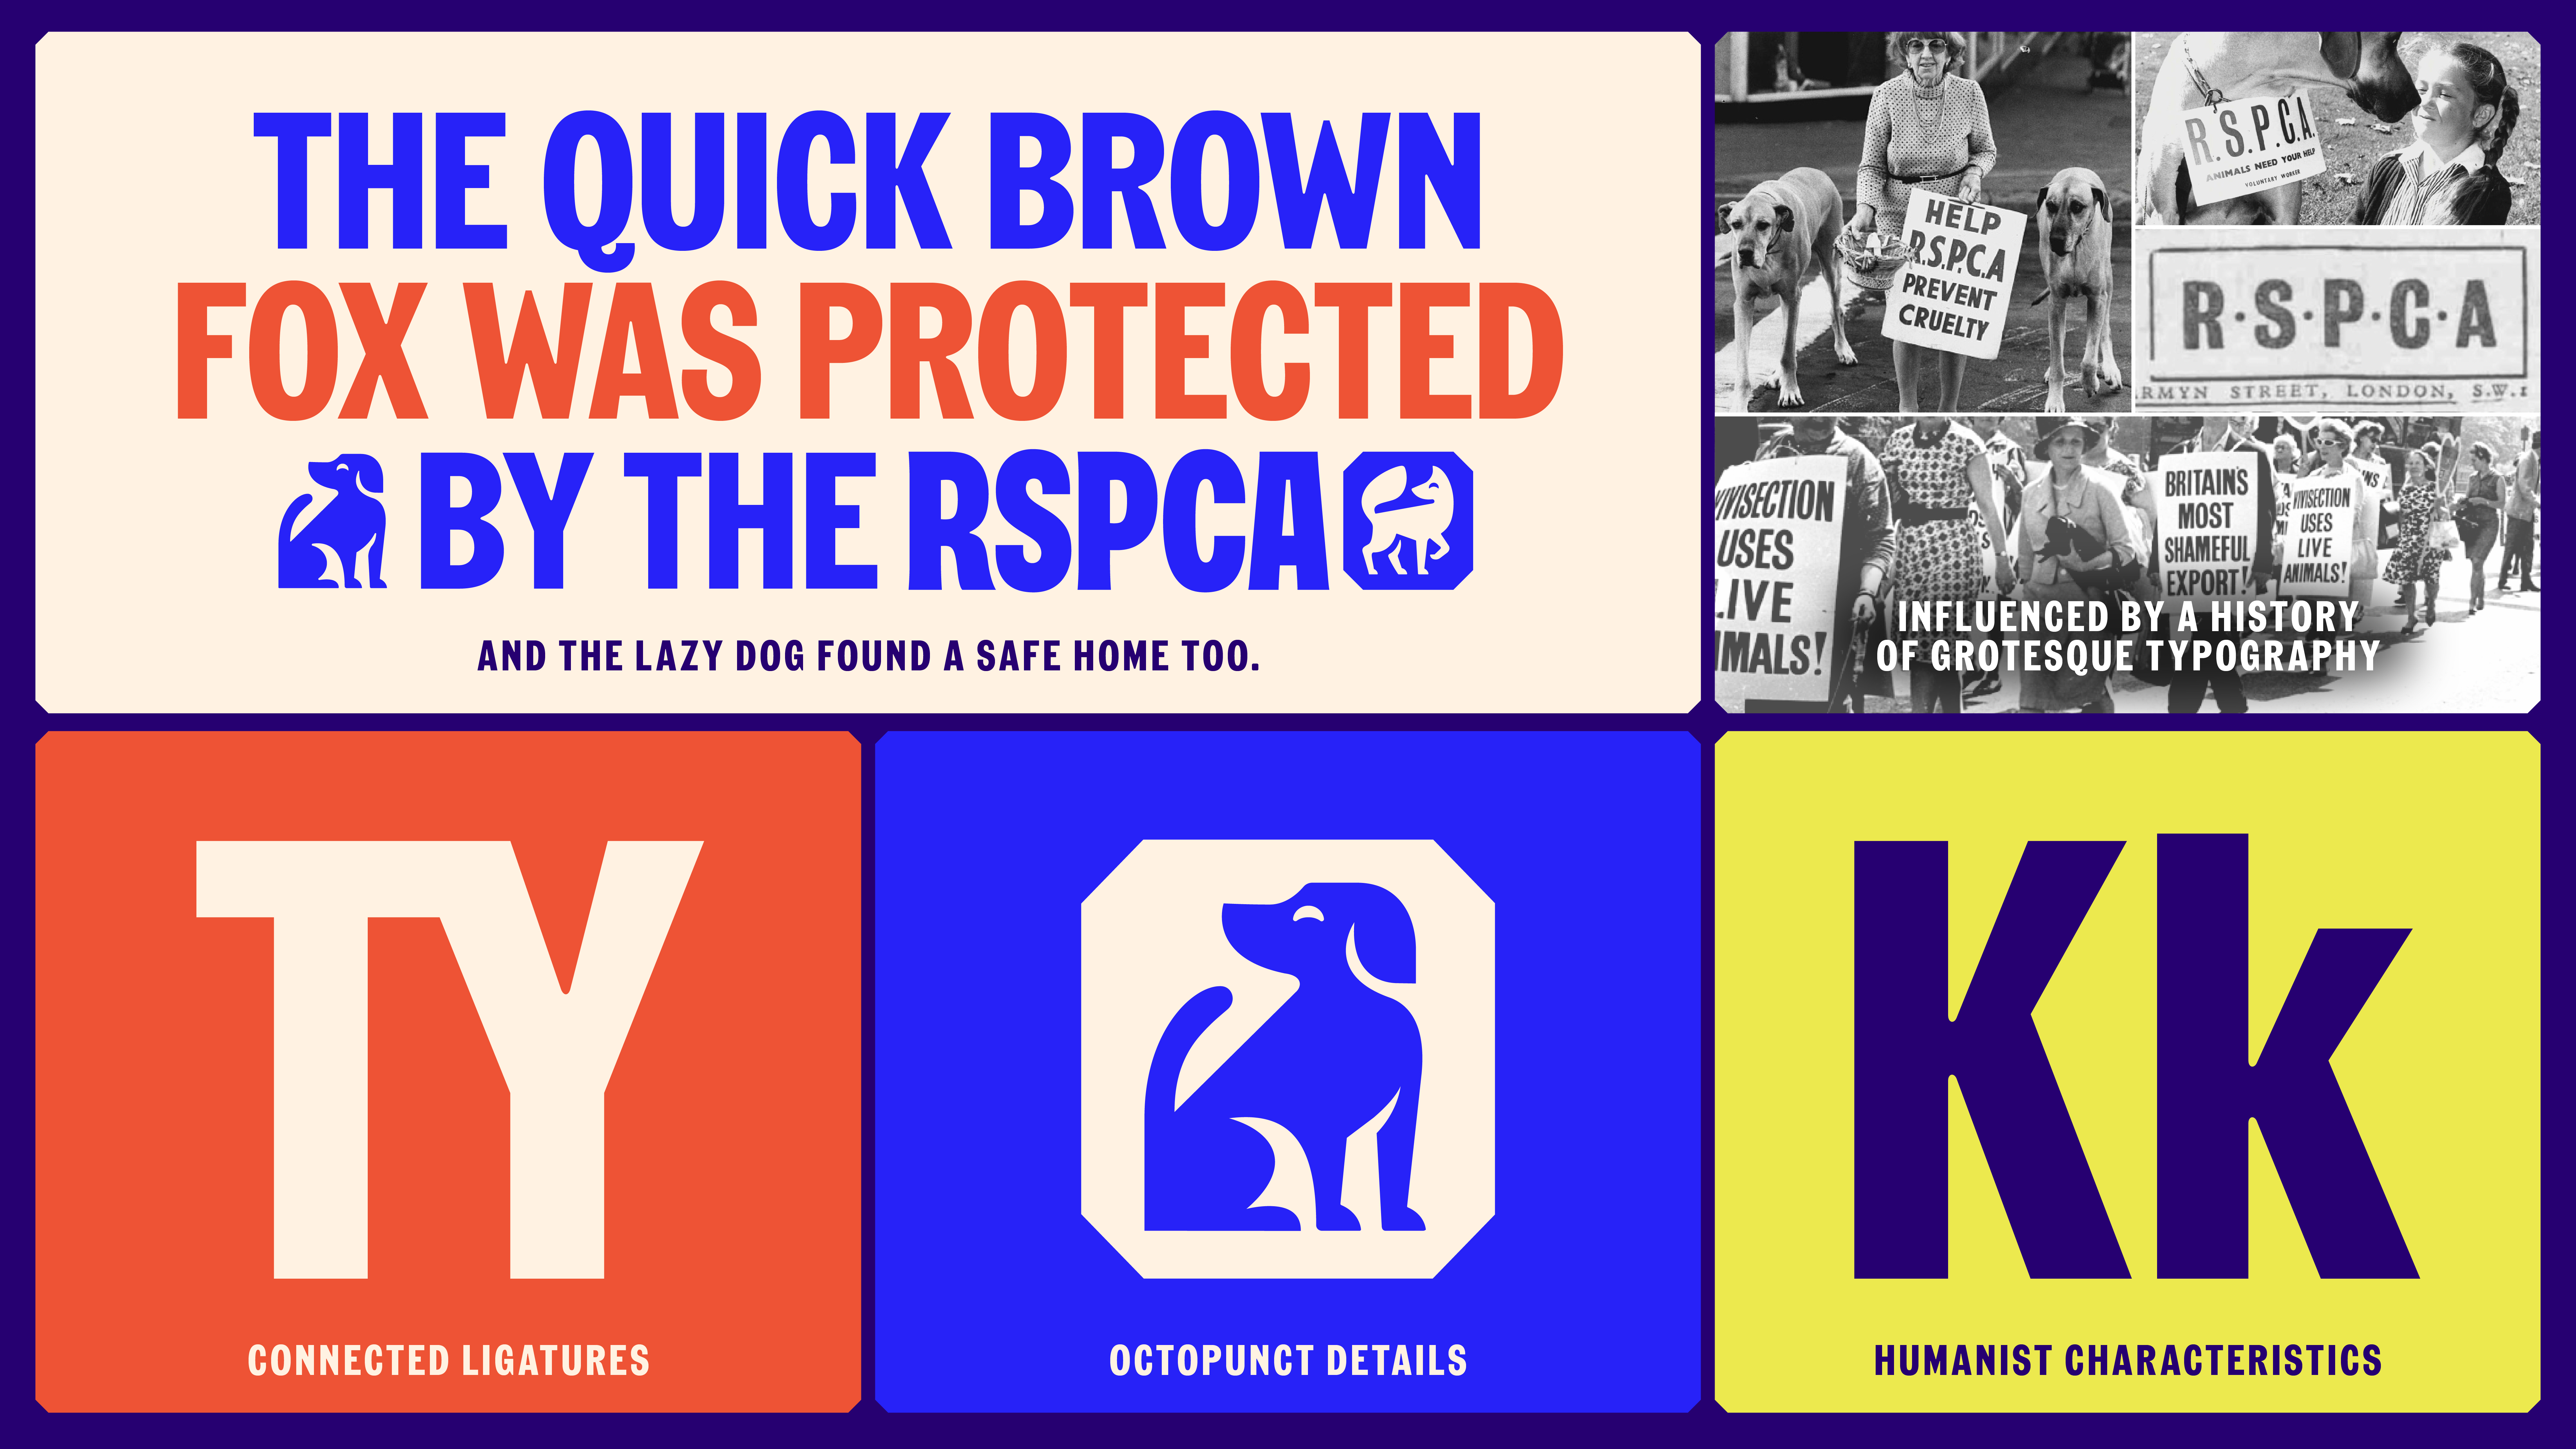 Demonstration of RSPCA Wilberforce Sans typeface, including example sentence